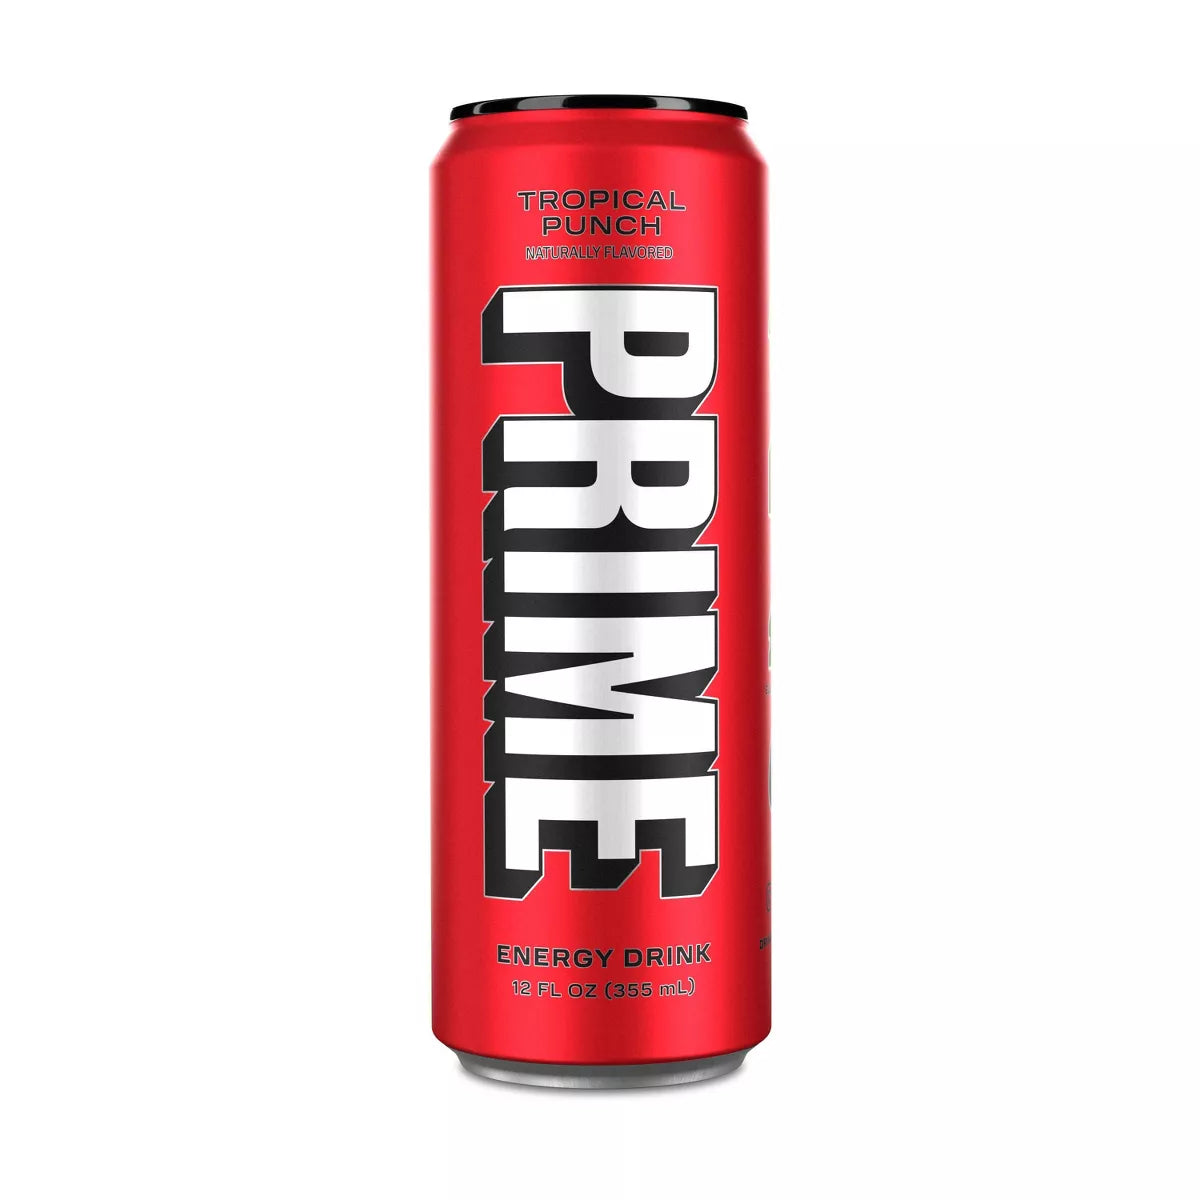 Prime Hydration Drink From Logan Paul And KSI Now Sold In, 45% OFF